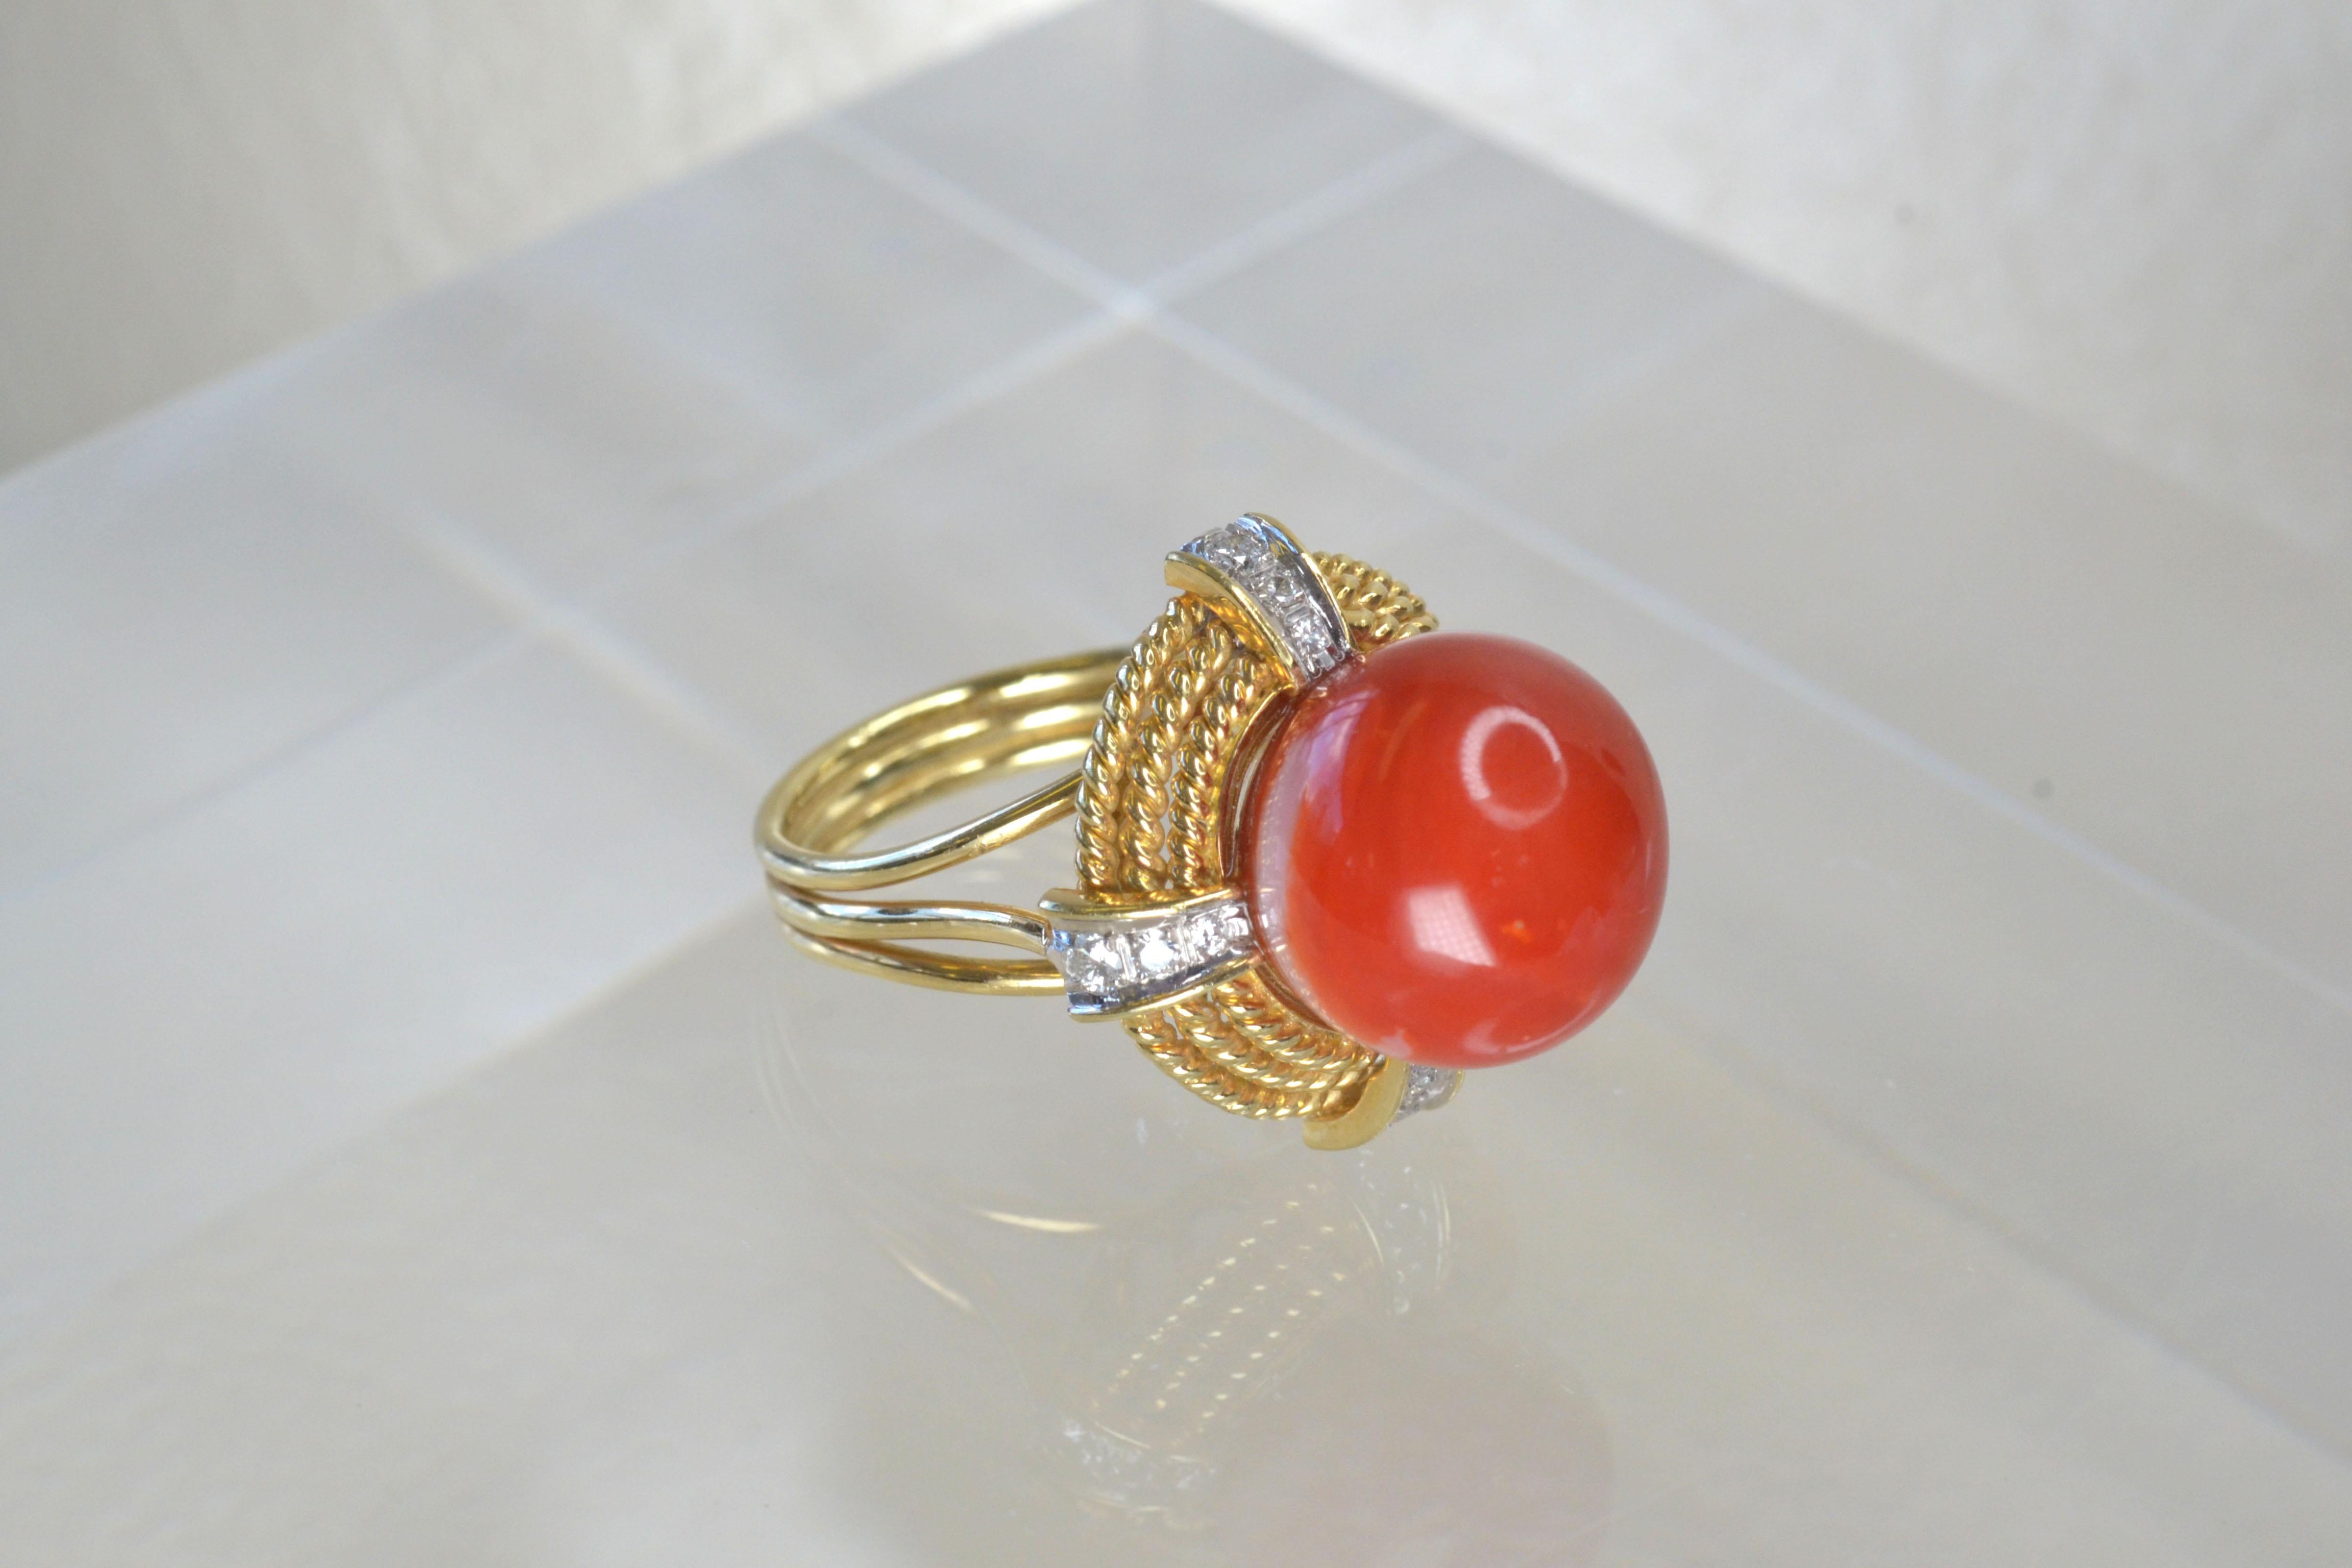 Vintage 14k Gold Coral Sphere Ring with White Diamonds, One-of-a-kind

This one-of-a-kind coral ring is the perfect statement piece to complement any look. Its vibrant colour and classic vintage look make such a stunning piece and the white diamonds